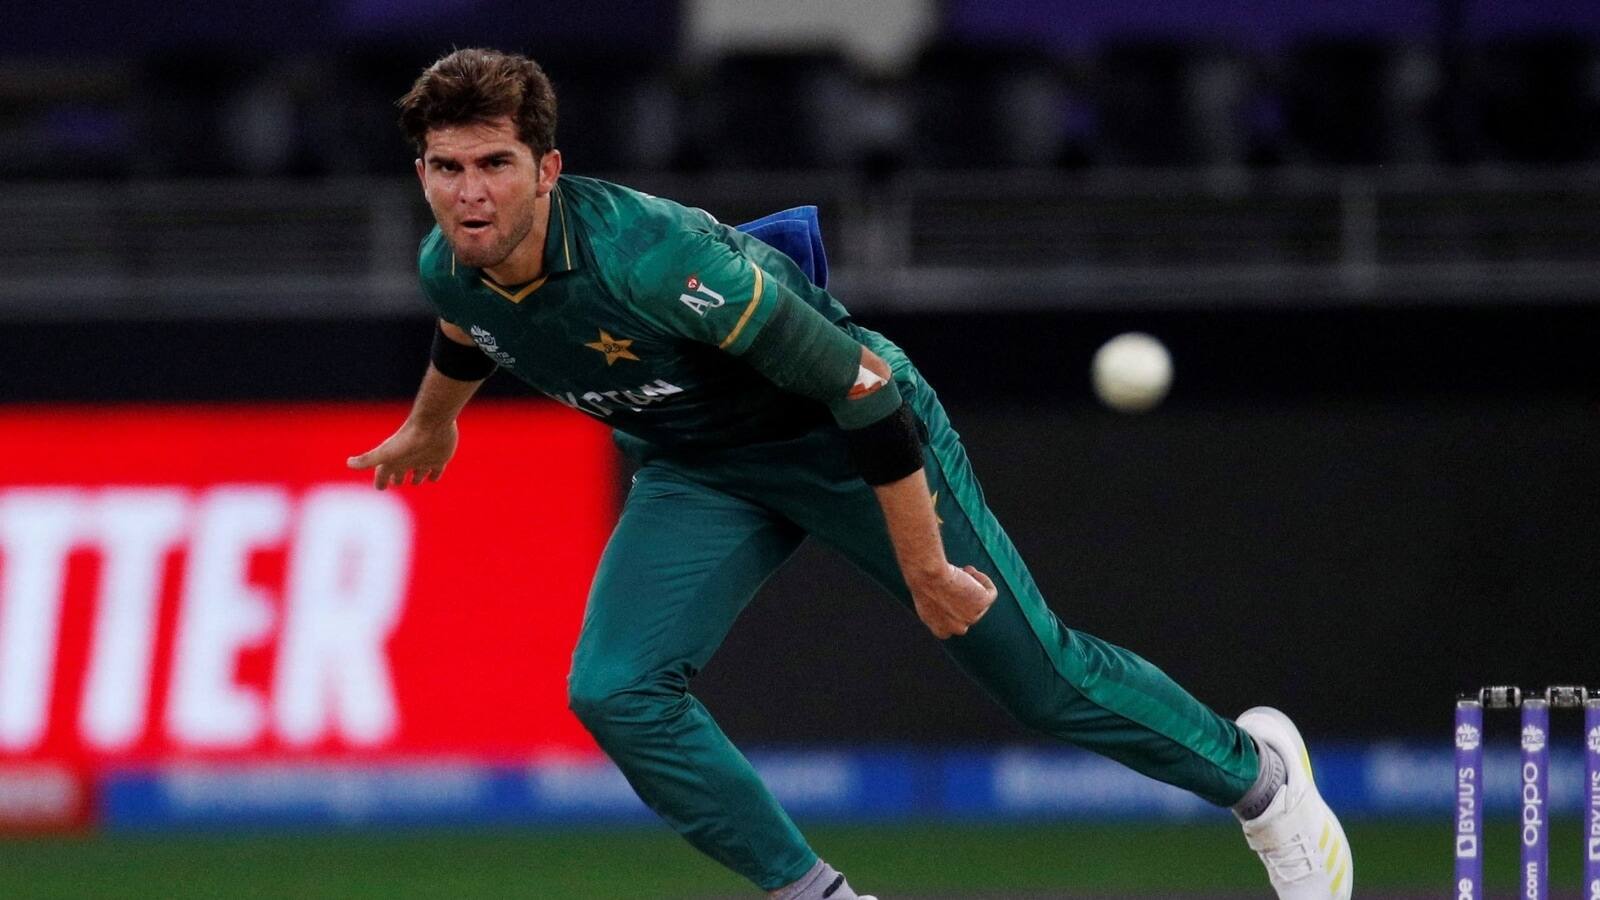 Shaheen Afridi on the path to recovery, shares his bowling video